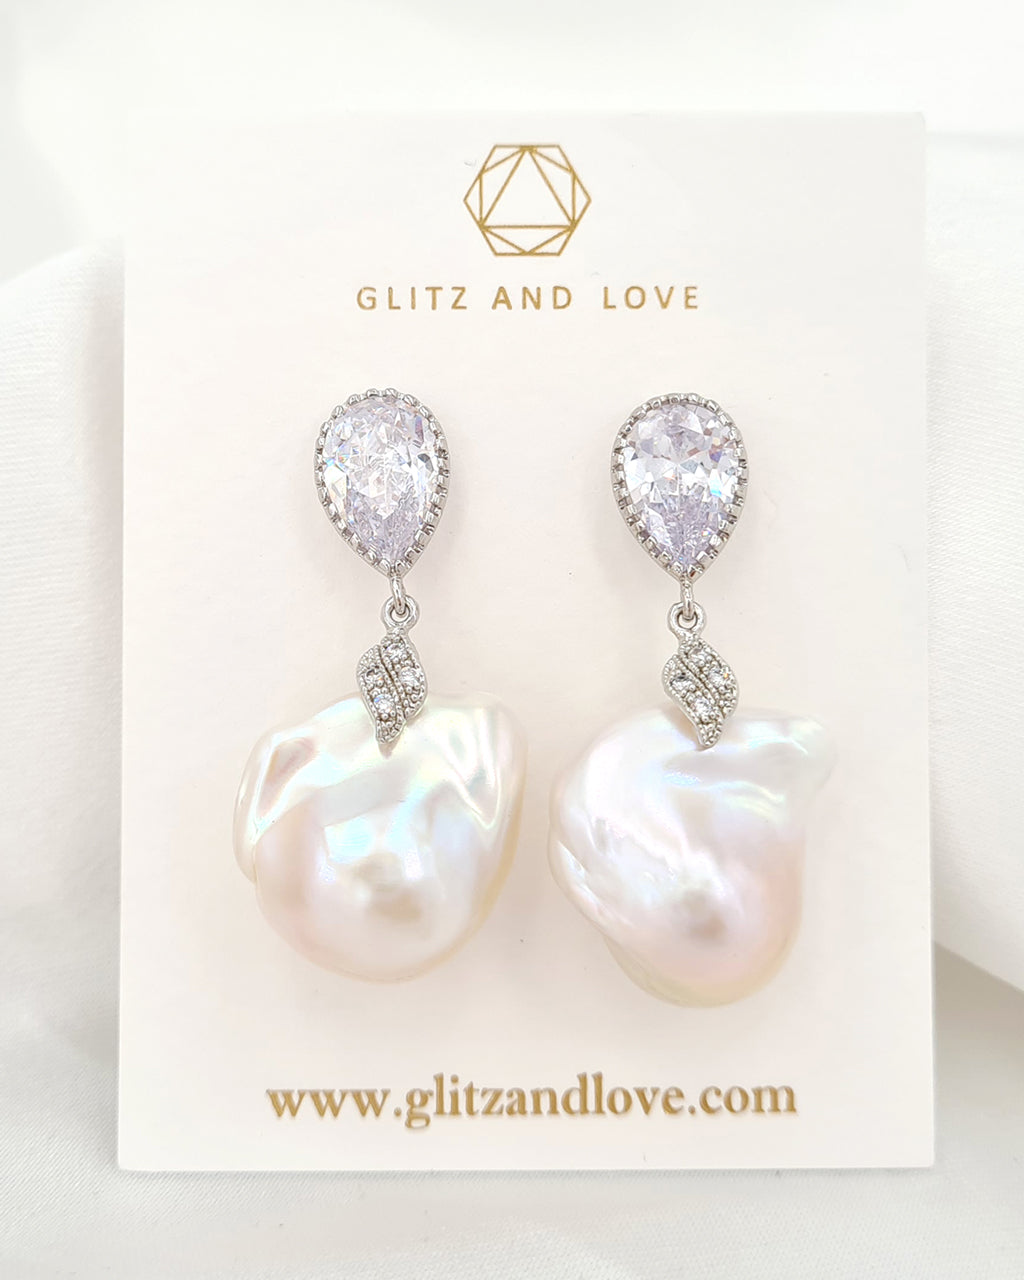 Statement White Baroque Pearl Teardrop Crystal Earrings - Wedding Bridal Jewelry for Brides and Bridesmaids | Baroque Pearl Jewelry for Mother's Day Gifts